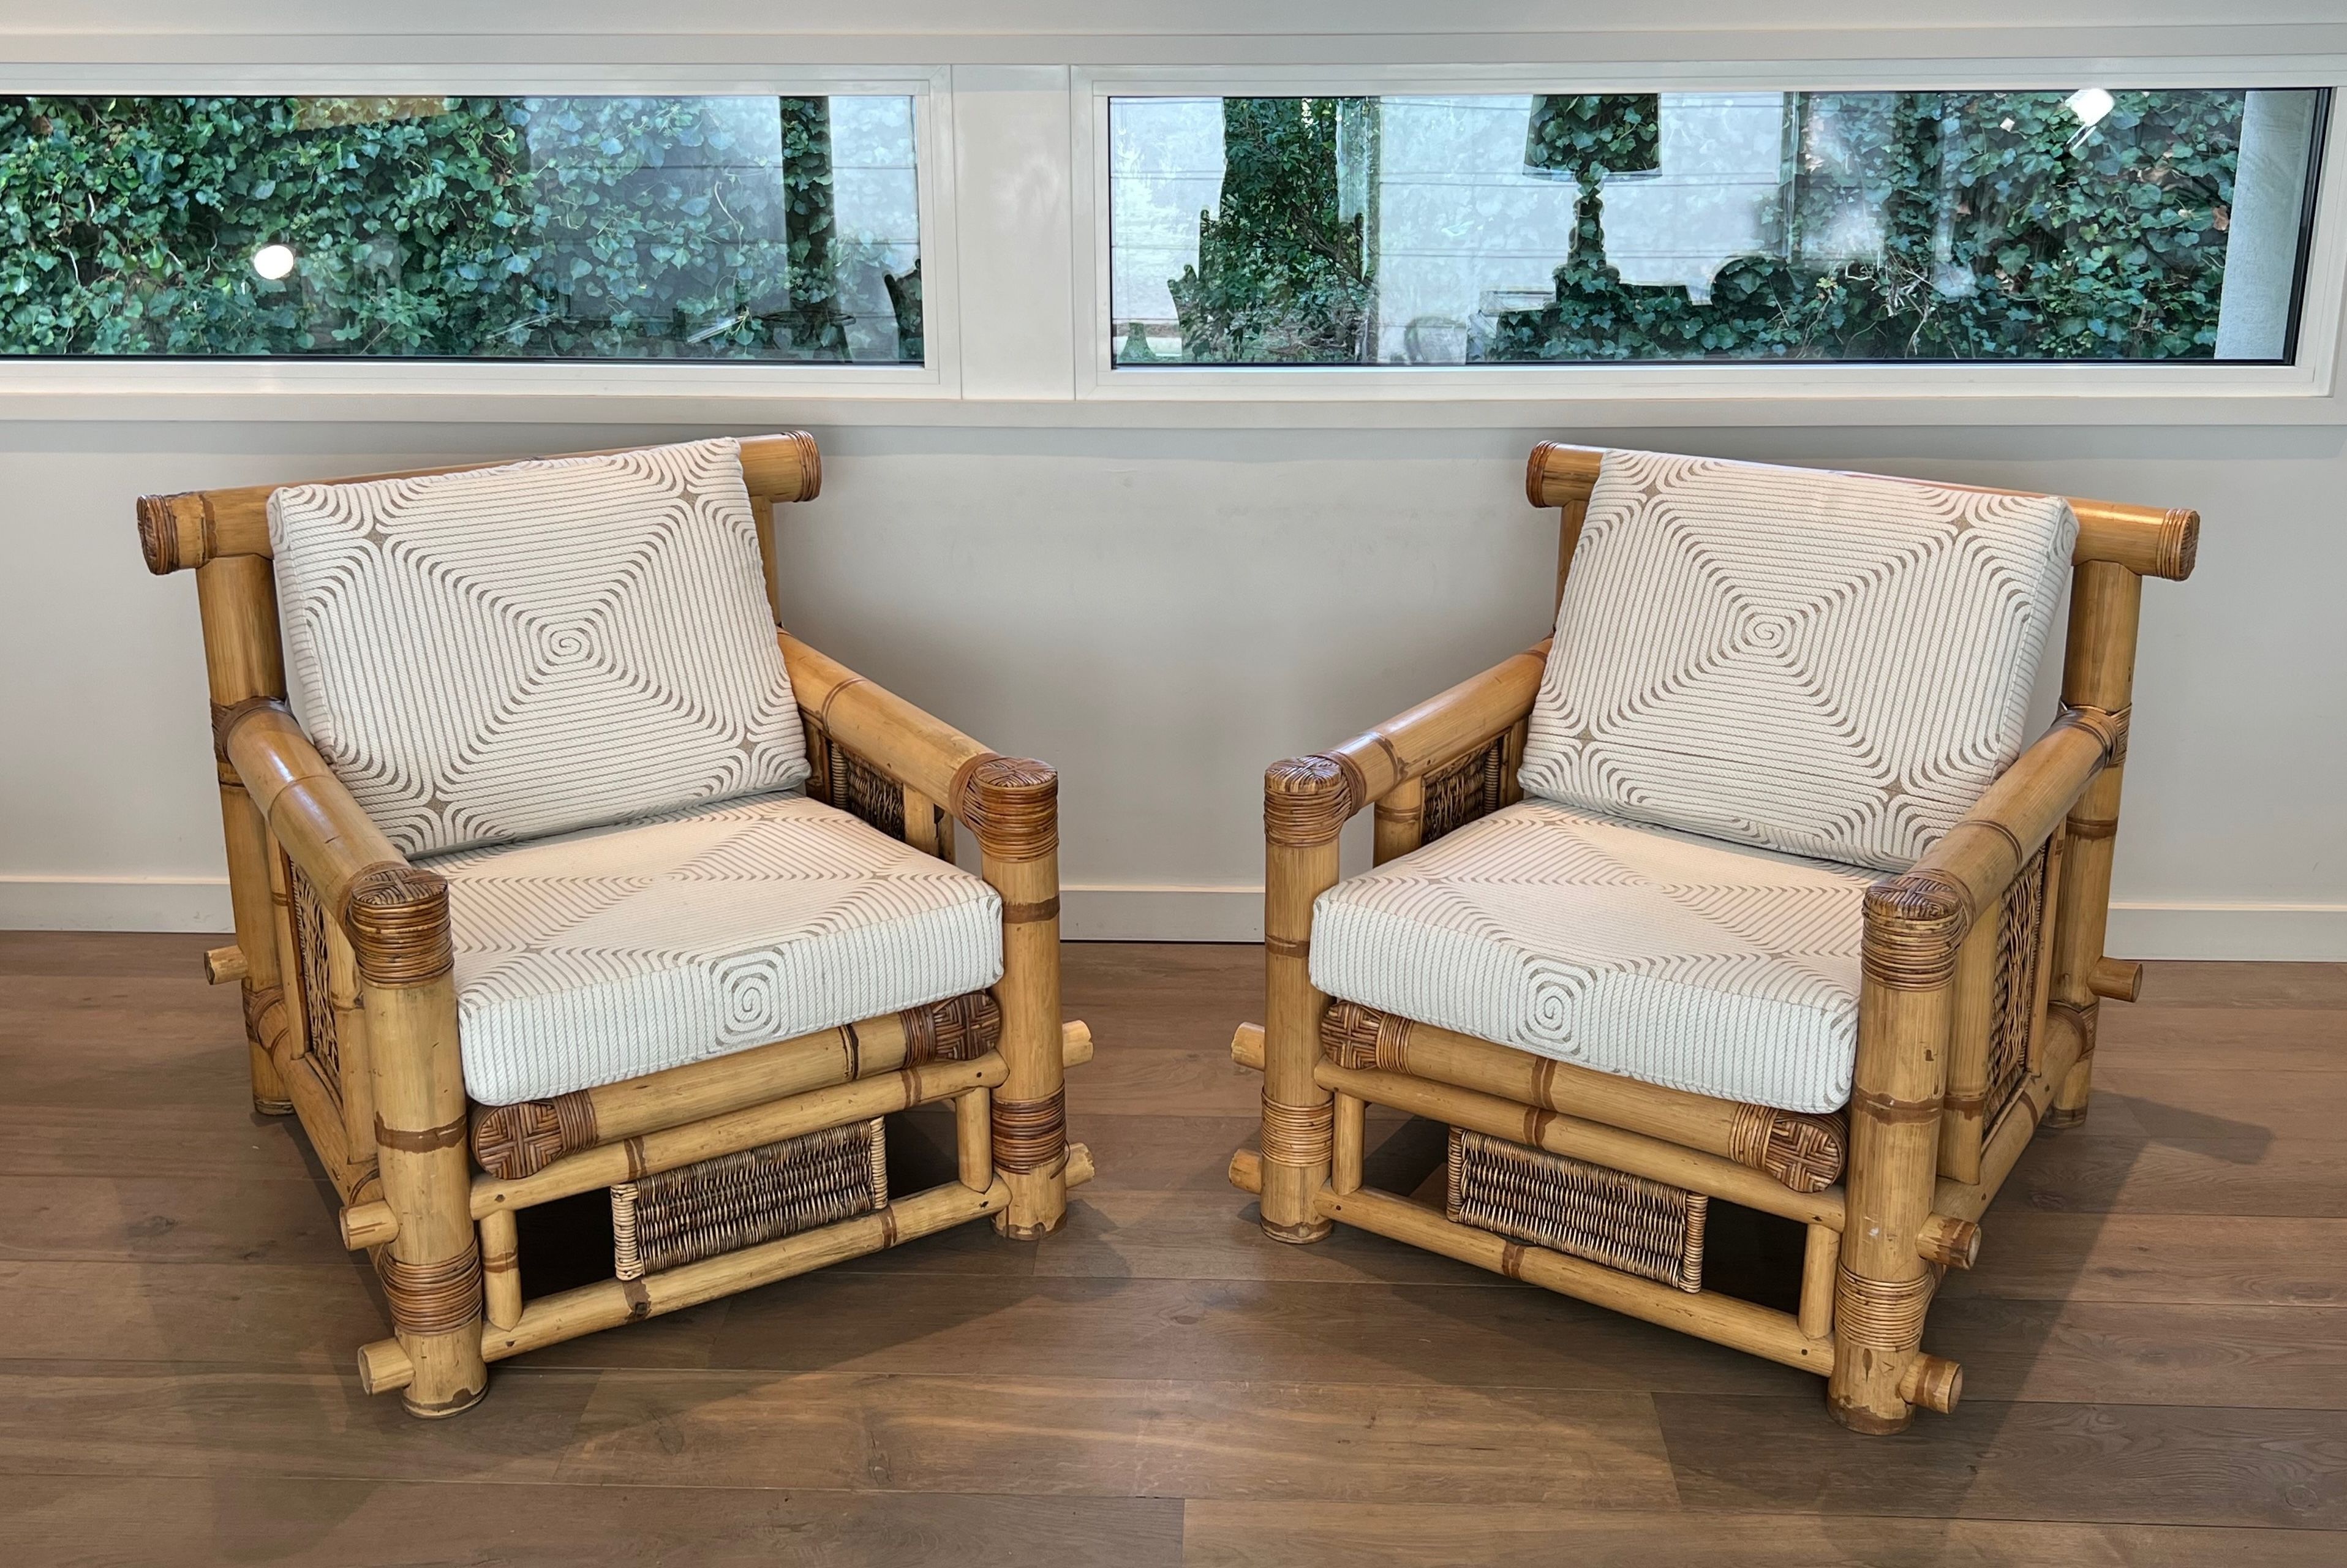 Pair of Large Bamboo Armchairs with Pierre Frey Cushions